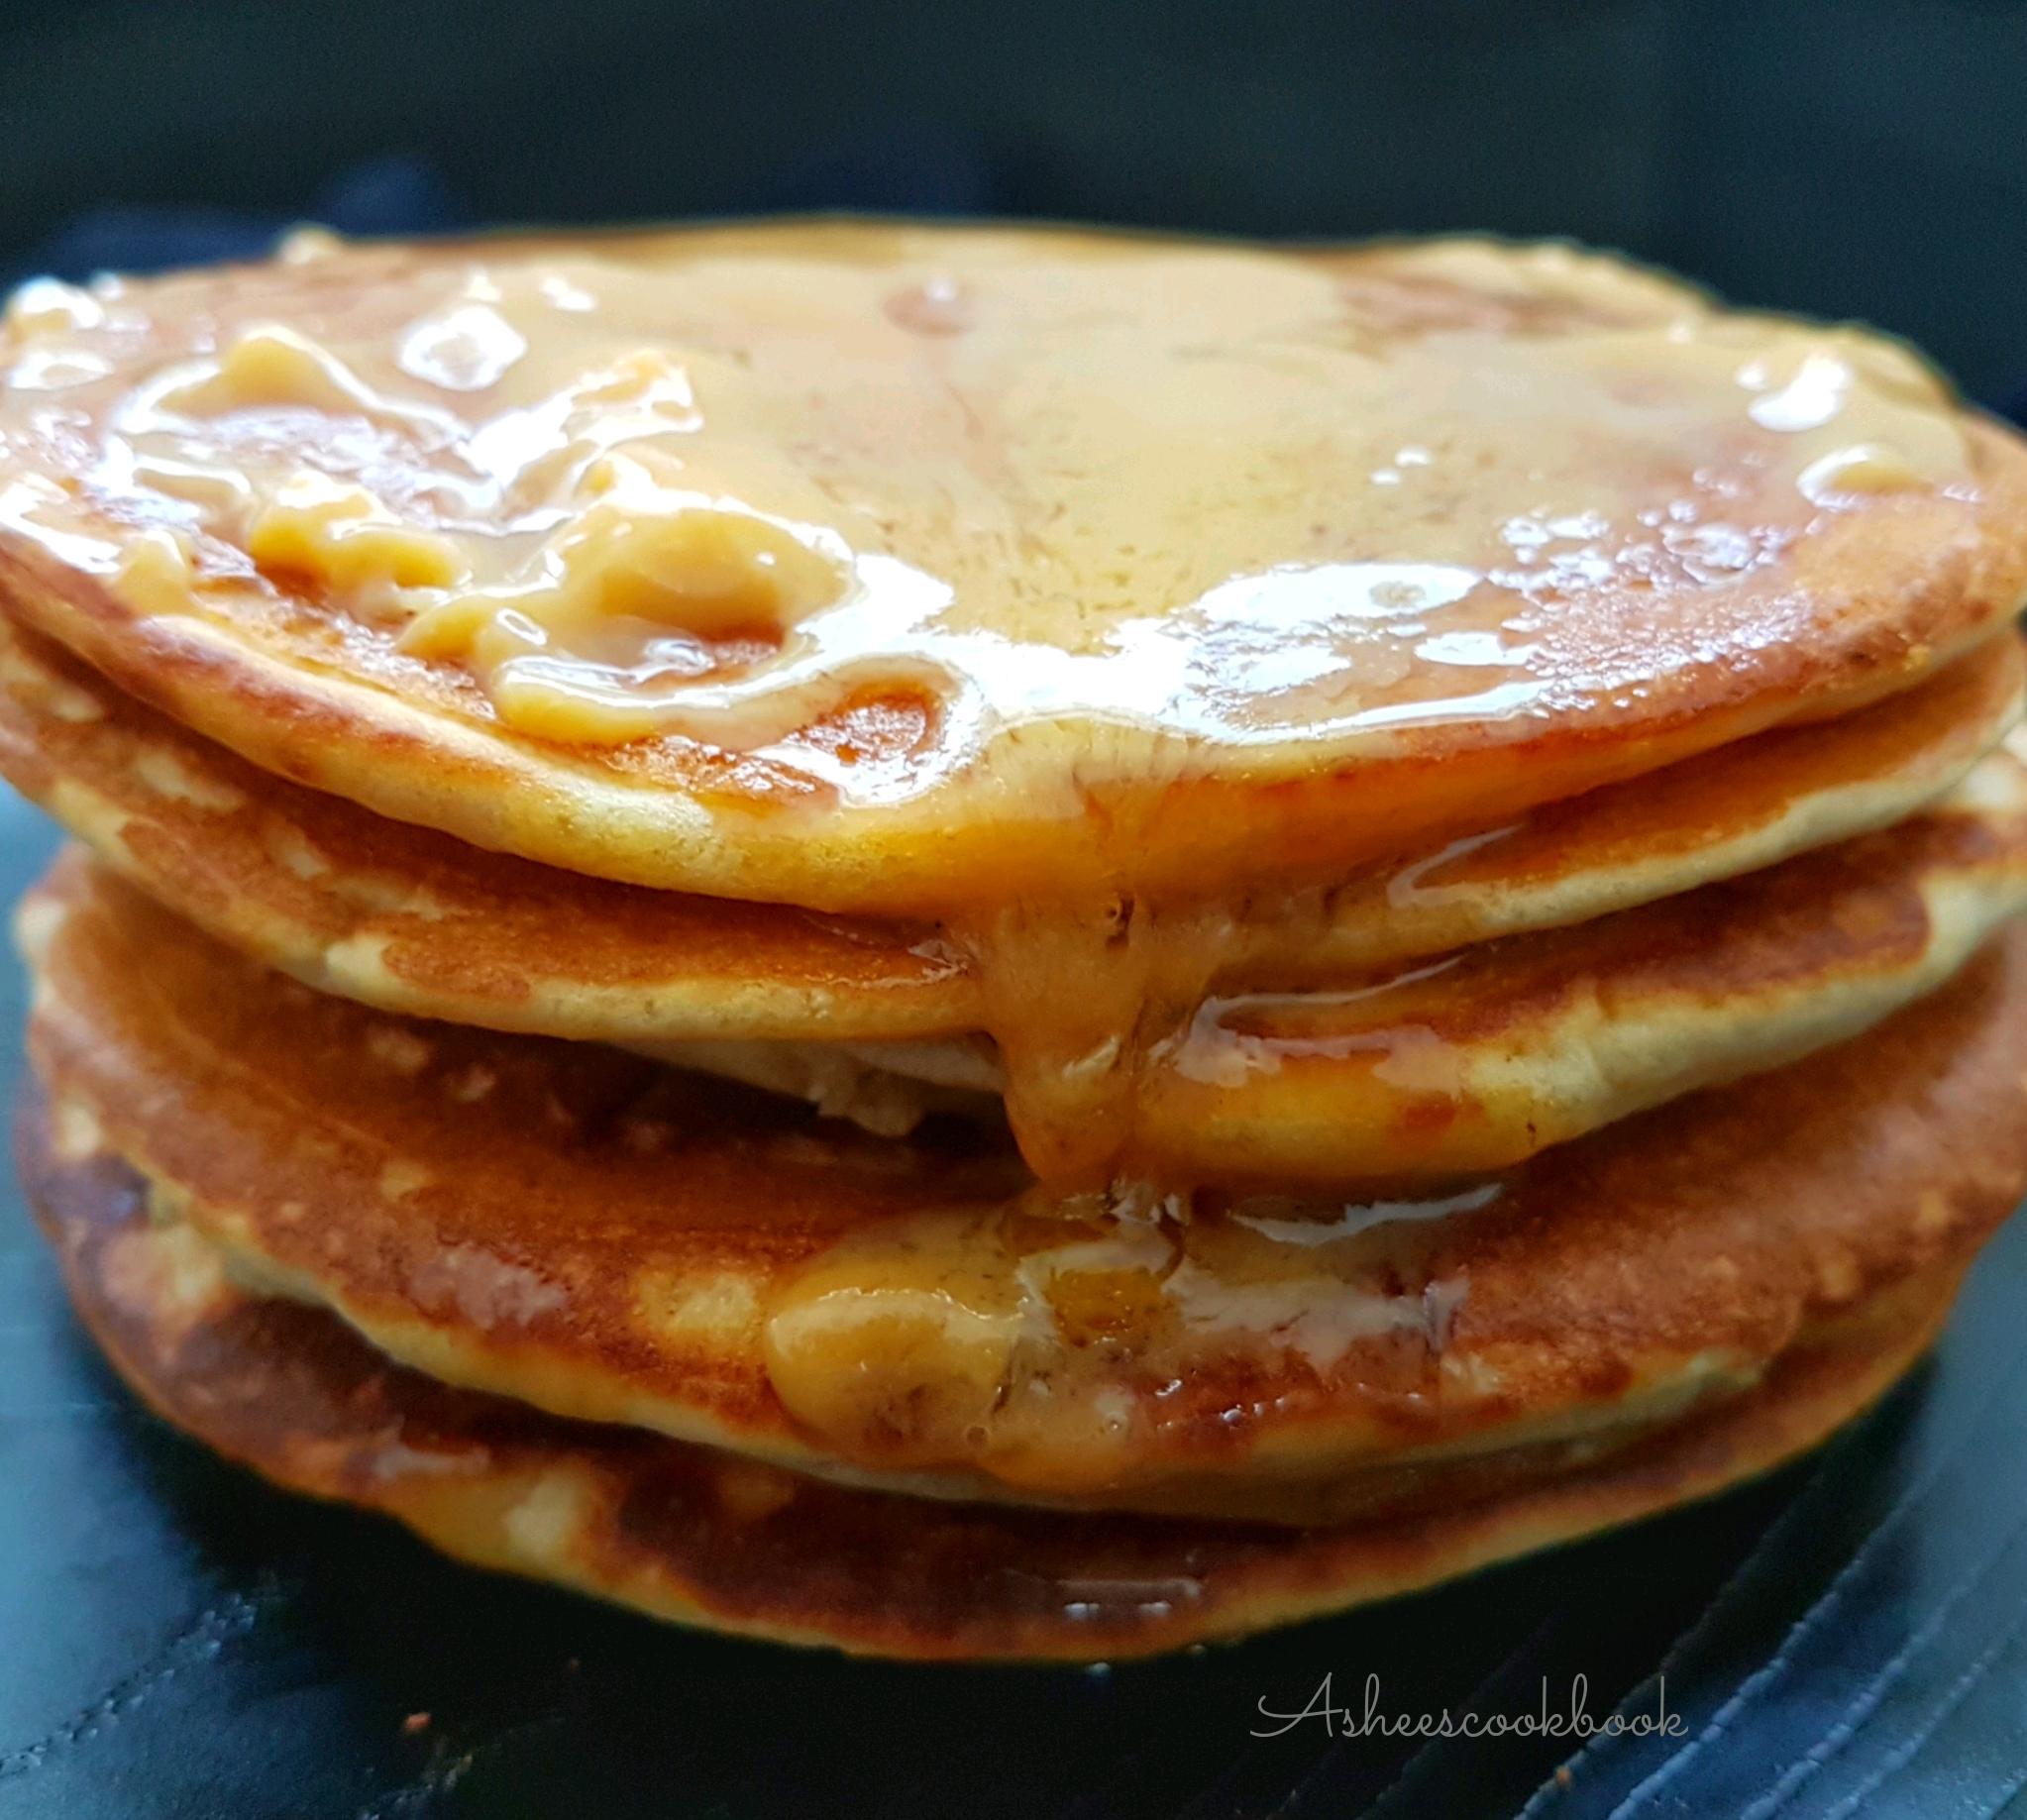  Unleash your inner chef and indulge in these fluffy Dulce de Leche pancakes